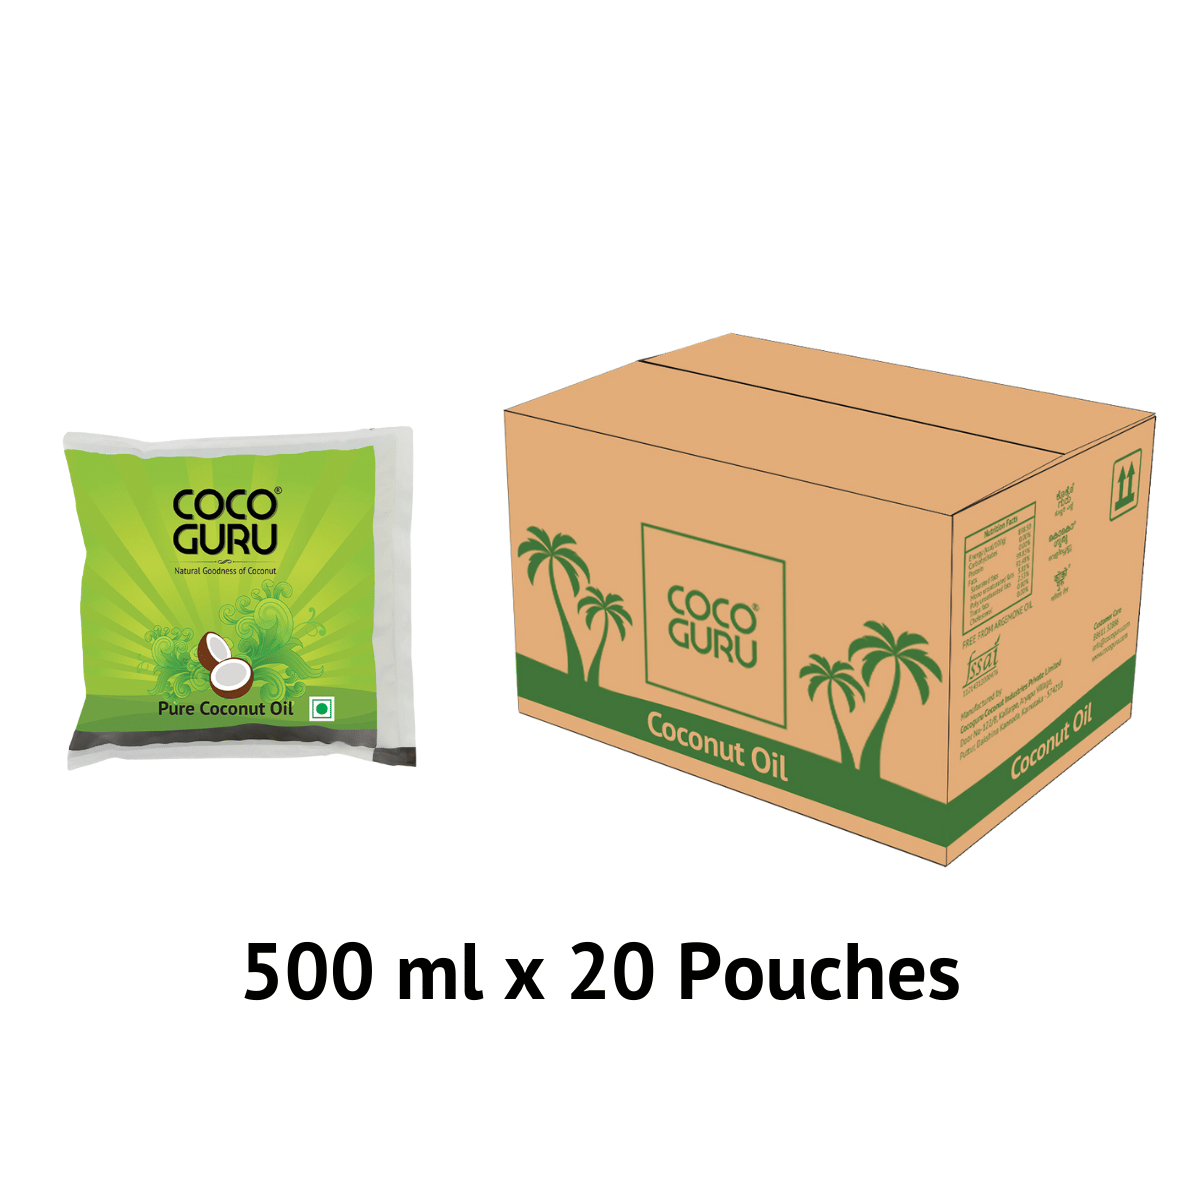 Cocoguru-High-Grade-Coconut-Oil-in-Pouch-500-ml-–-10-Litres-Box.png